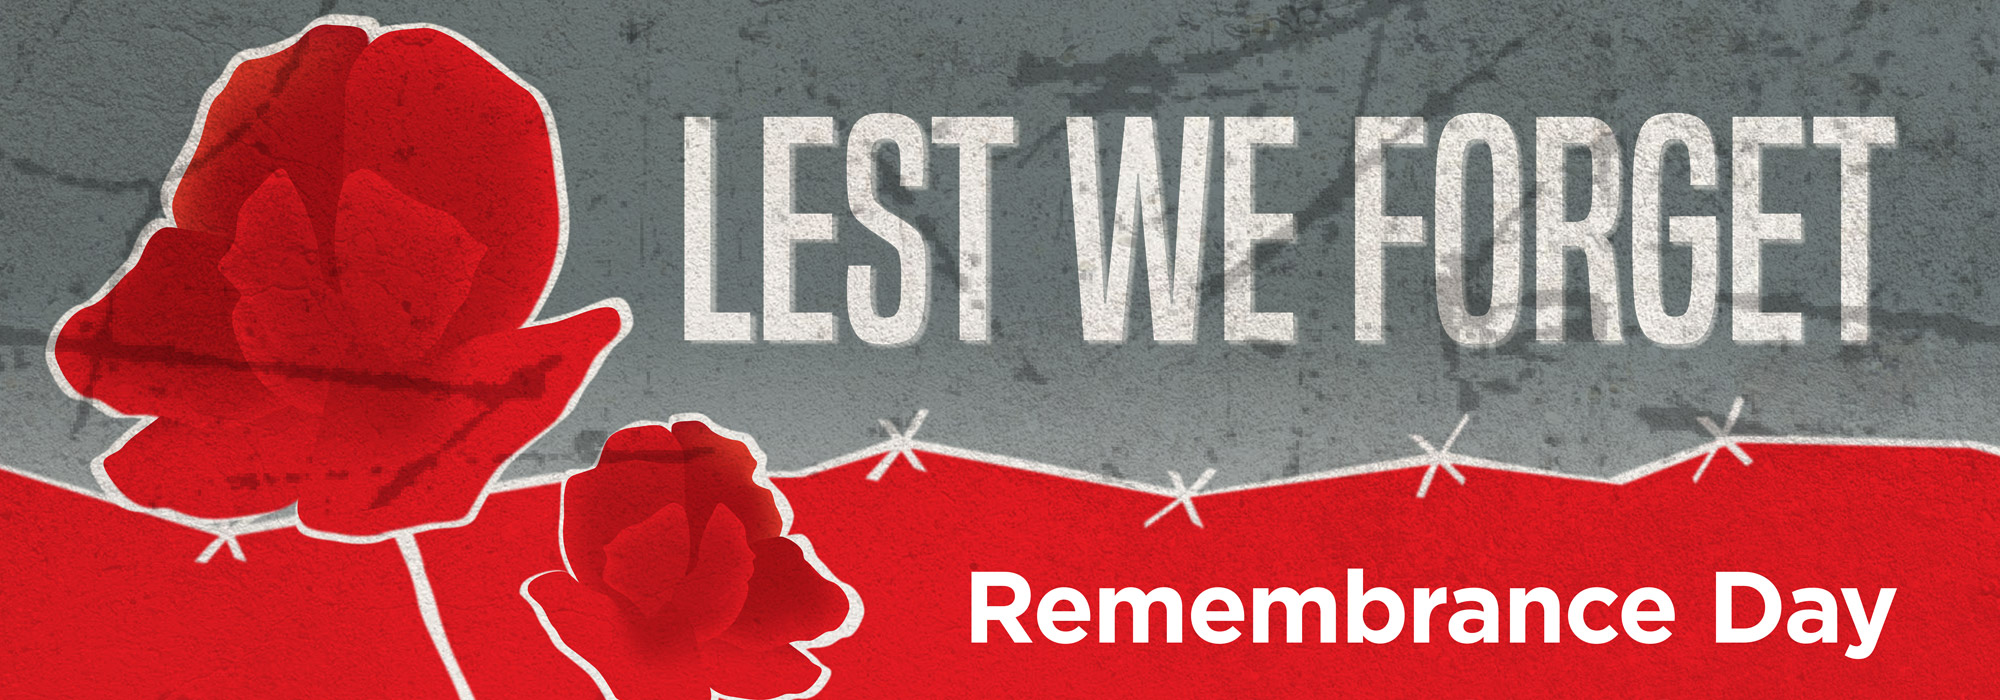 Lest We Forget, Remembrance Day